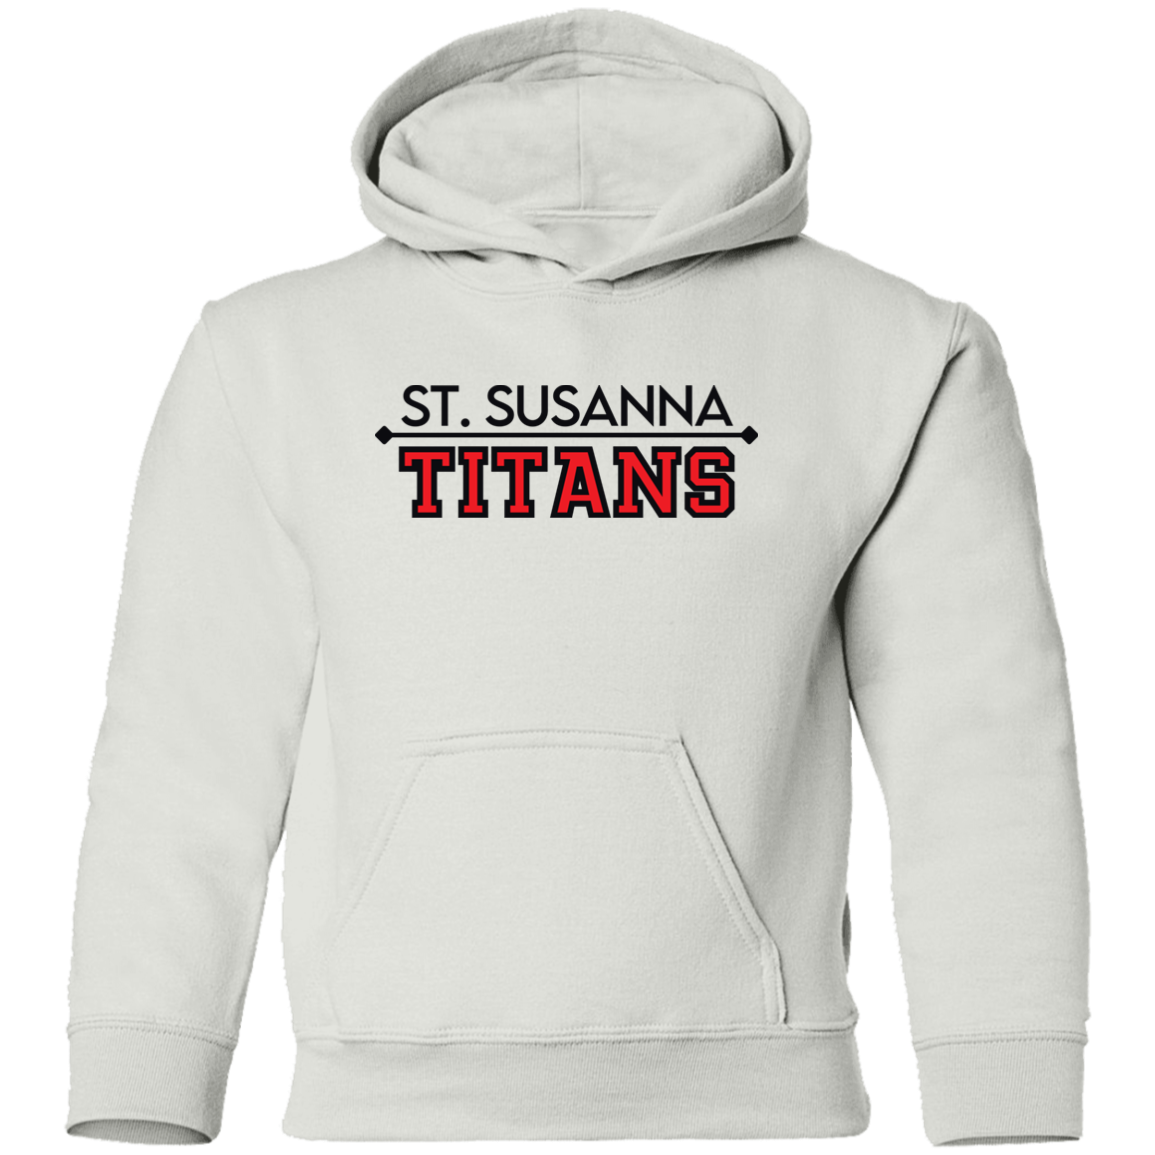 St. Susanna TITANS (White and Gray) Kids' Pullover Hoodie